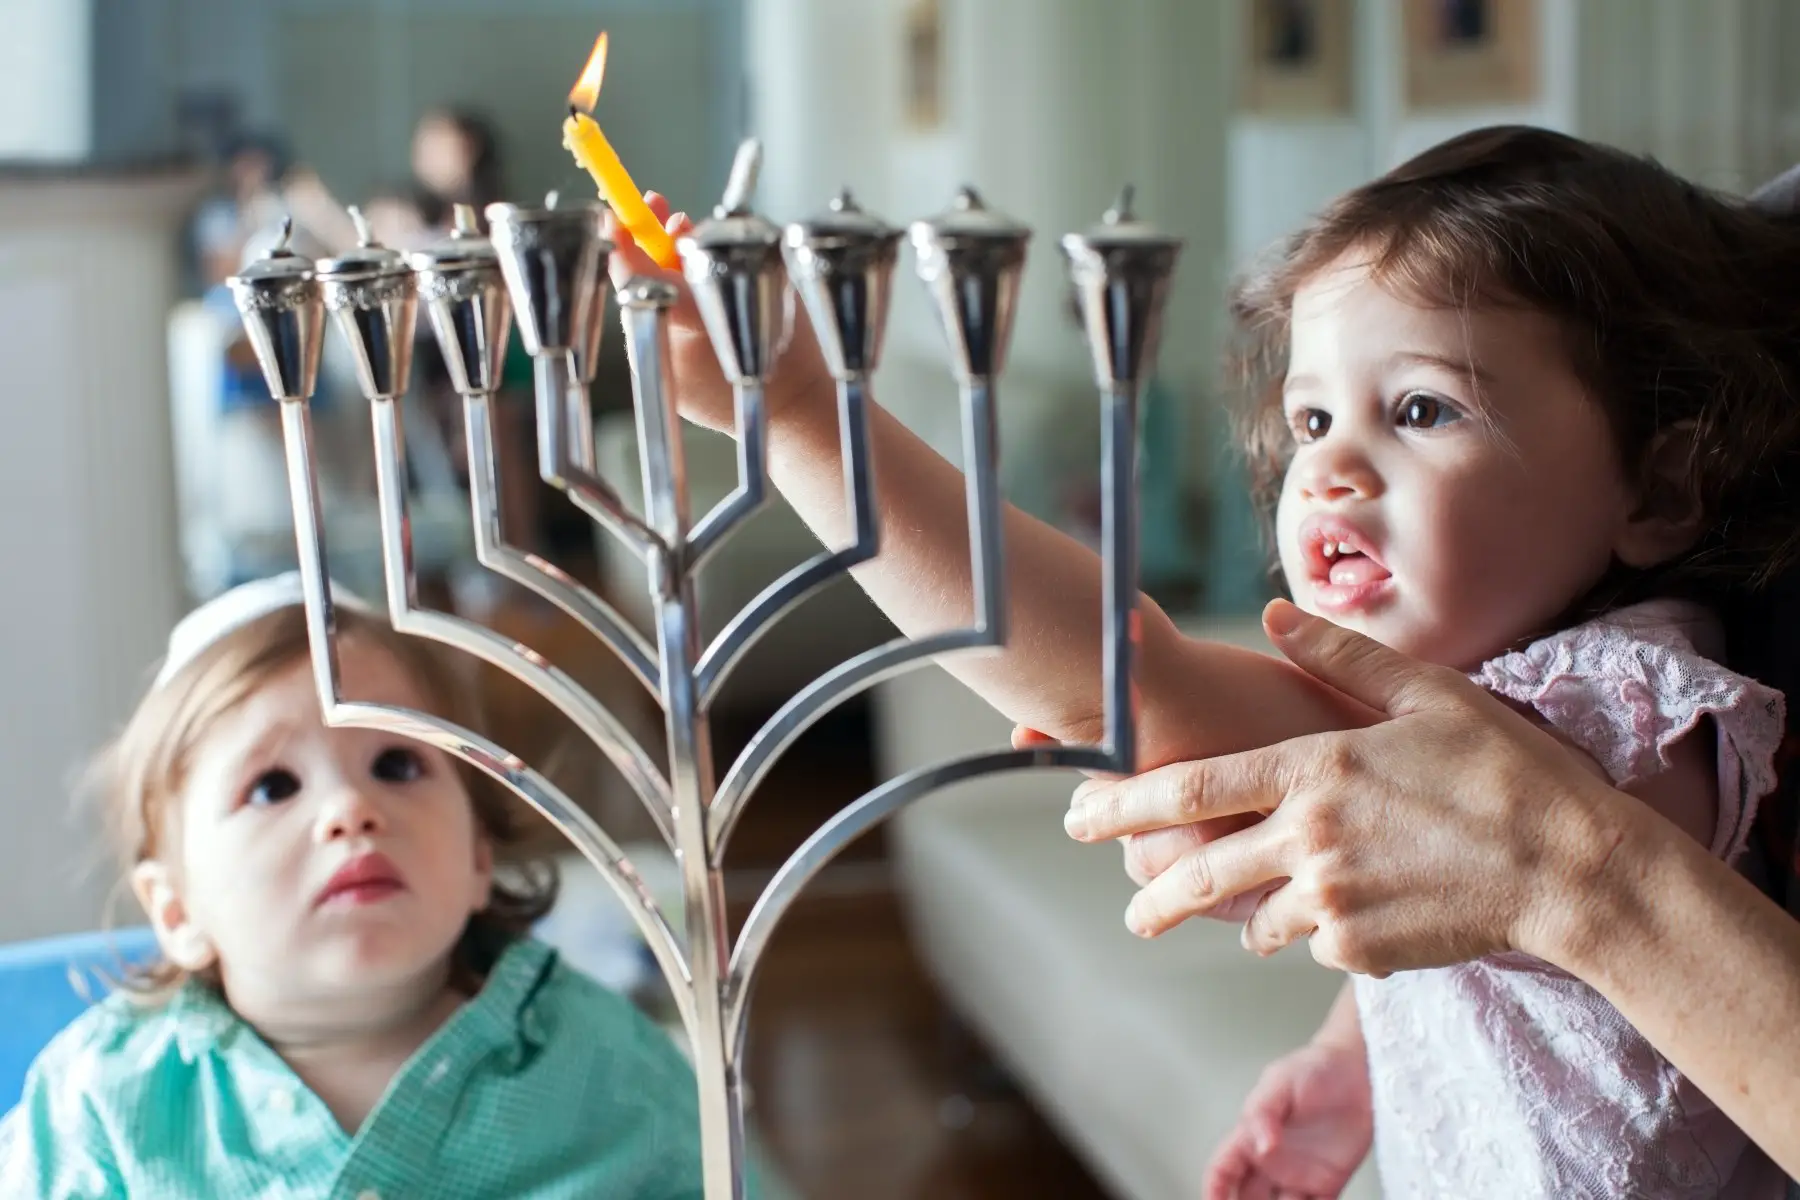 A young girl lights the Hanukkah menorah with help from an adult.